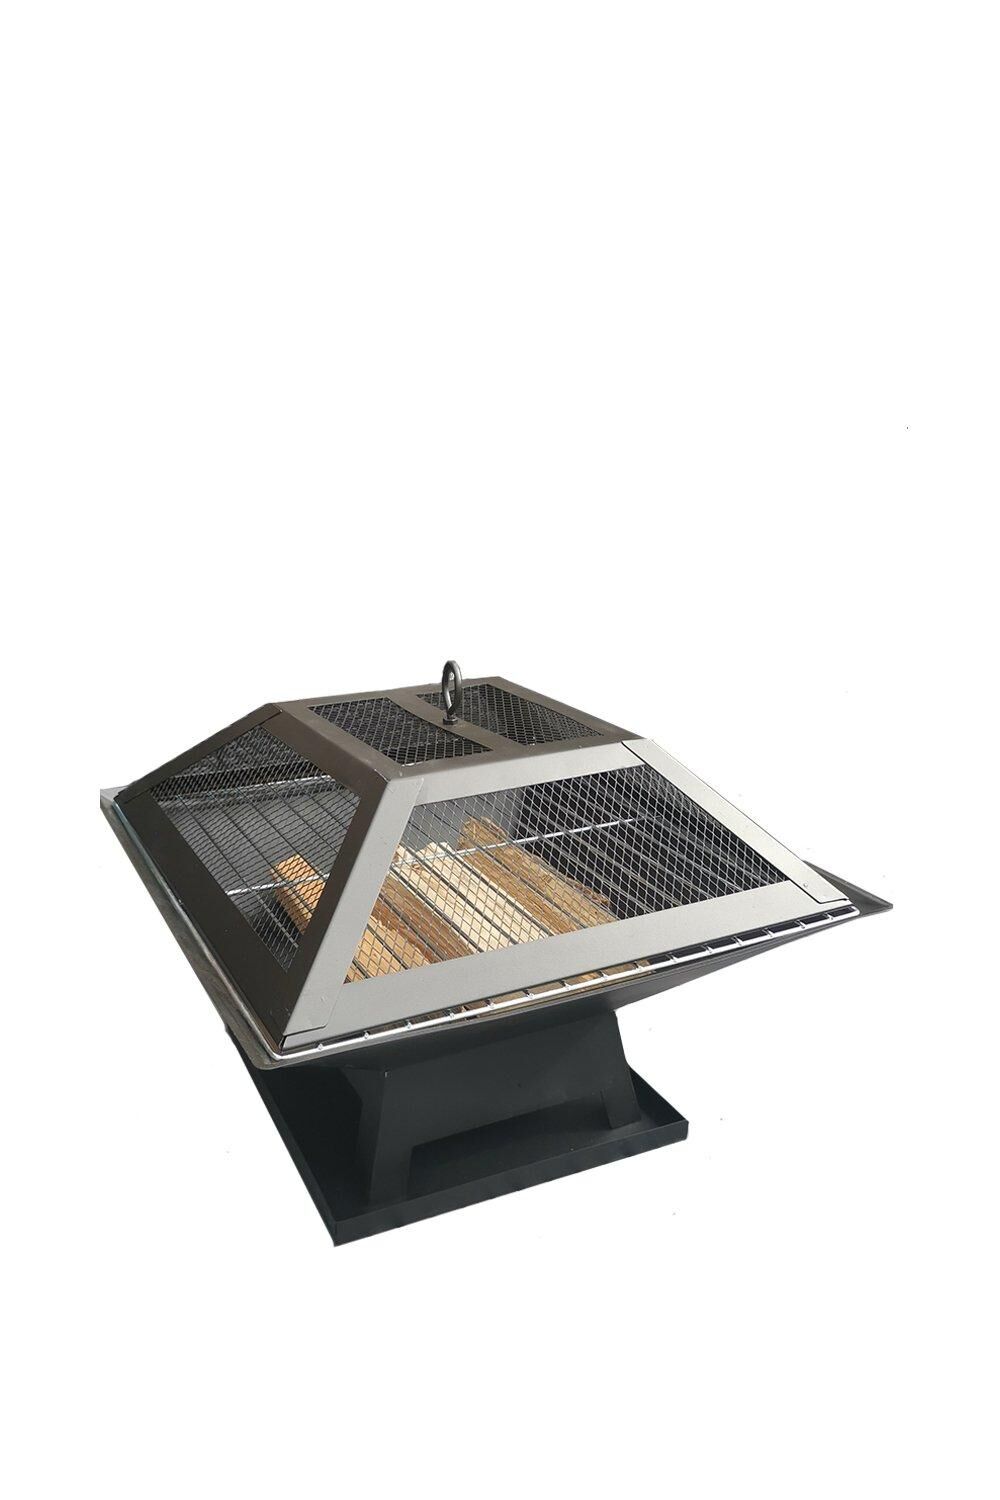 Samuel Alexander Redwood Outdoor Garden Square Fire Pit / Heater with Barbecue Grill